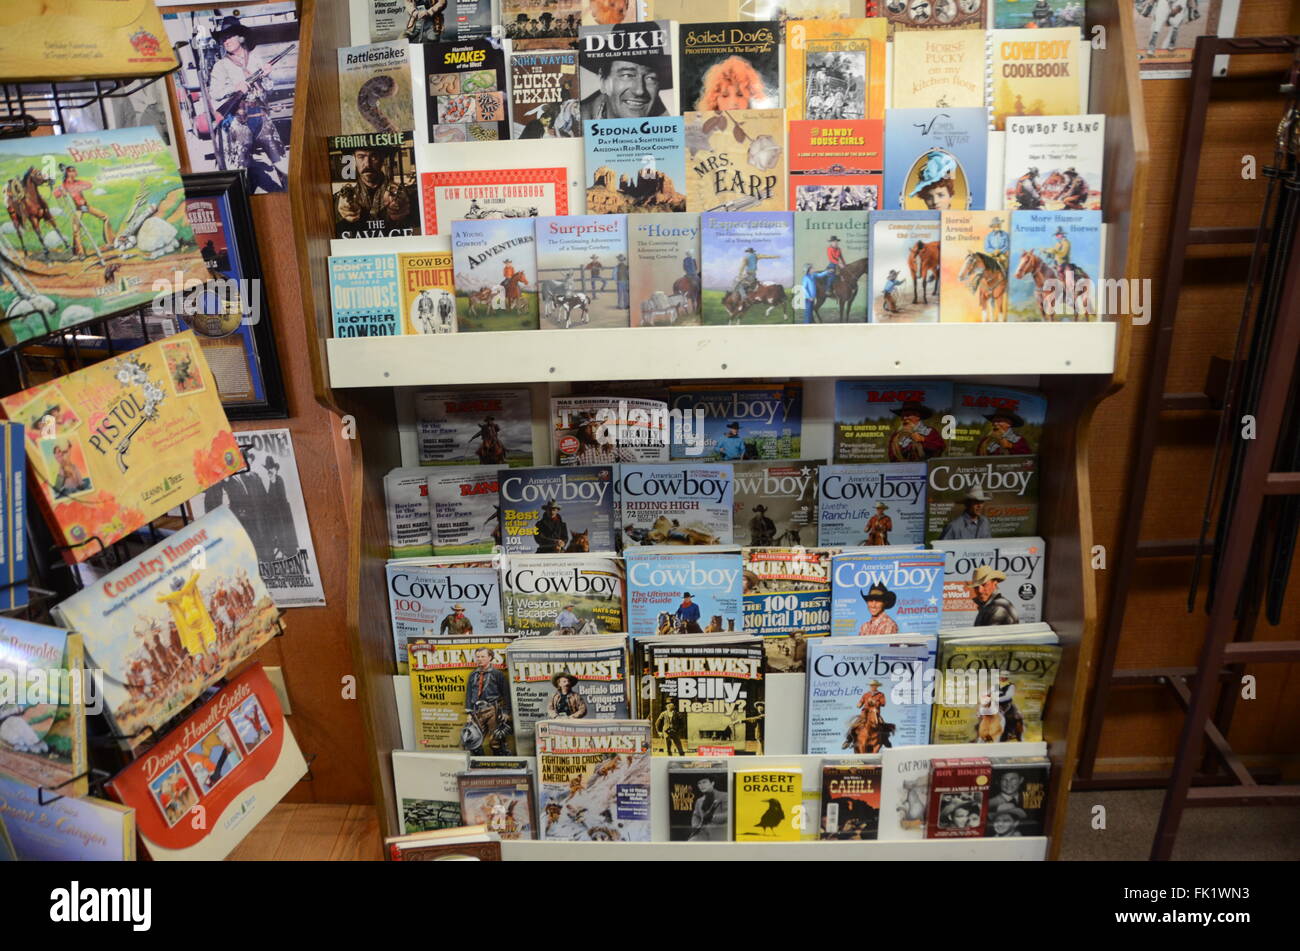 cowboy publications and books in sedona store Stock Photo